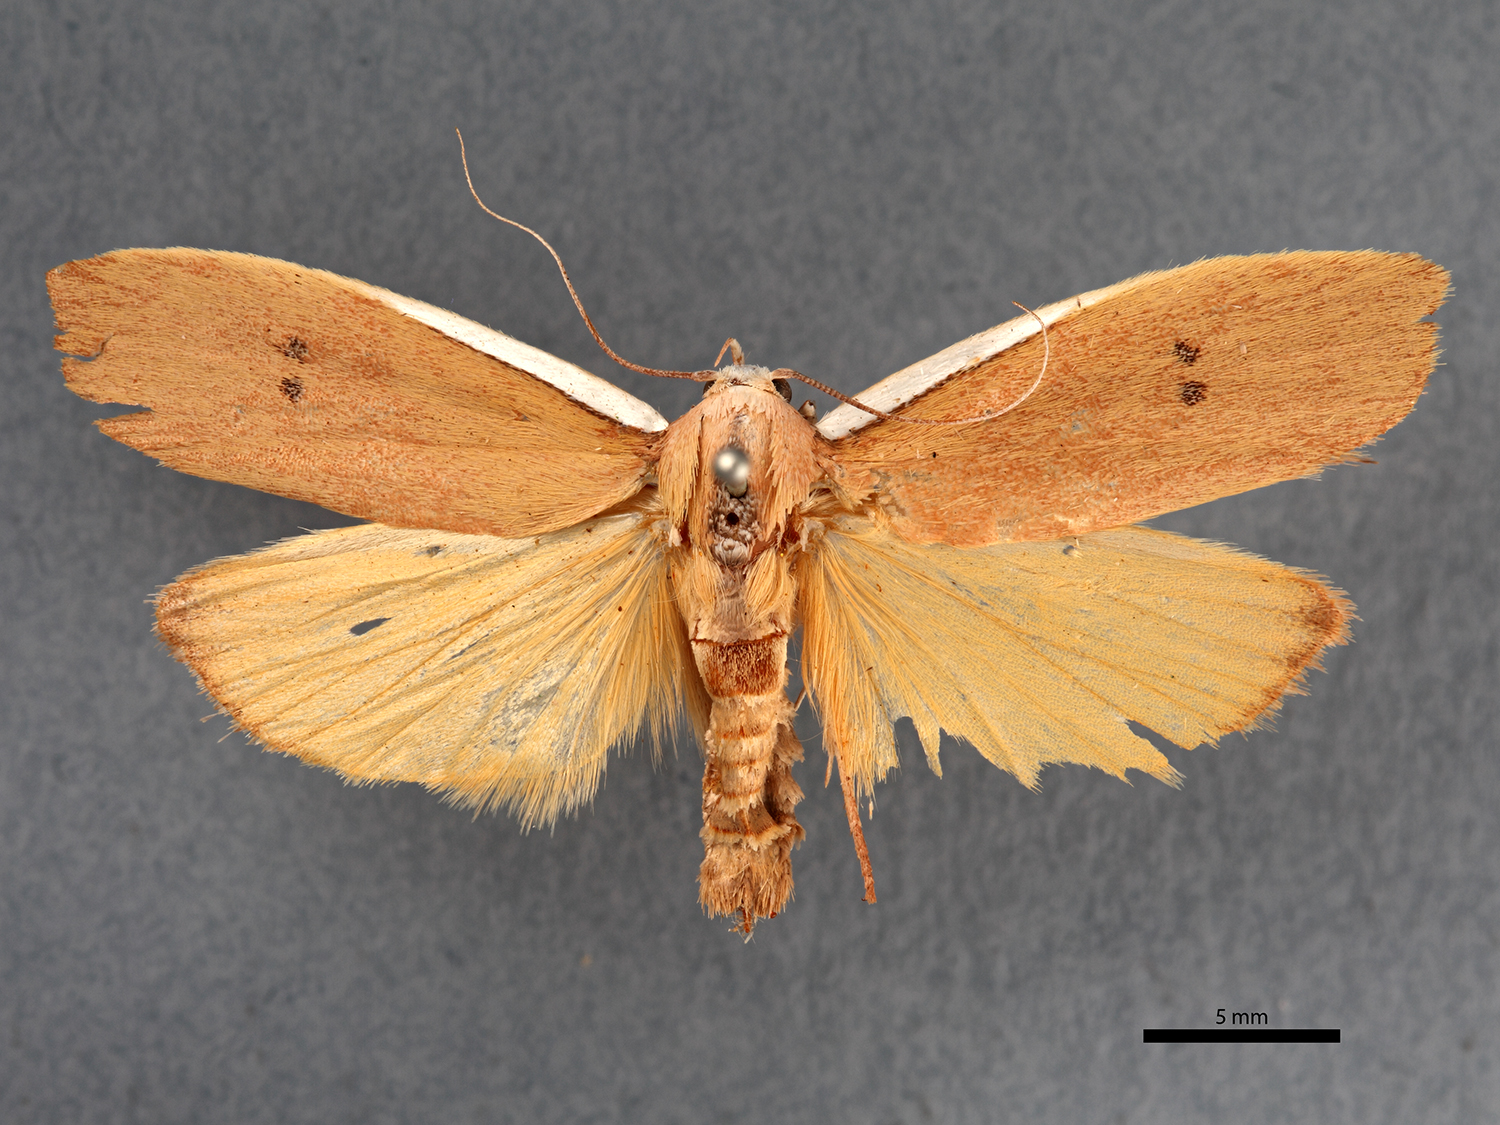 This type specimen of Cryptophasa citrinopa, was collected in Broken Hill in 1914. Natural History Museums care for type specimens to ensure their safety and perpetual availability for future researchers to refer to and review.